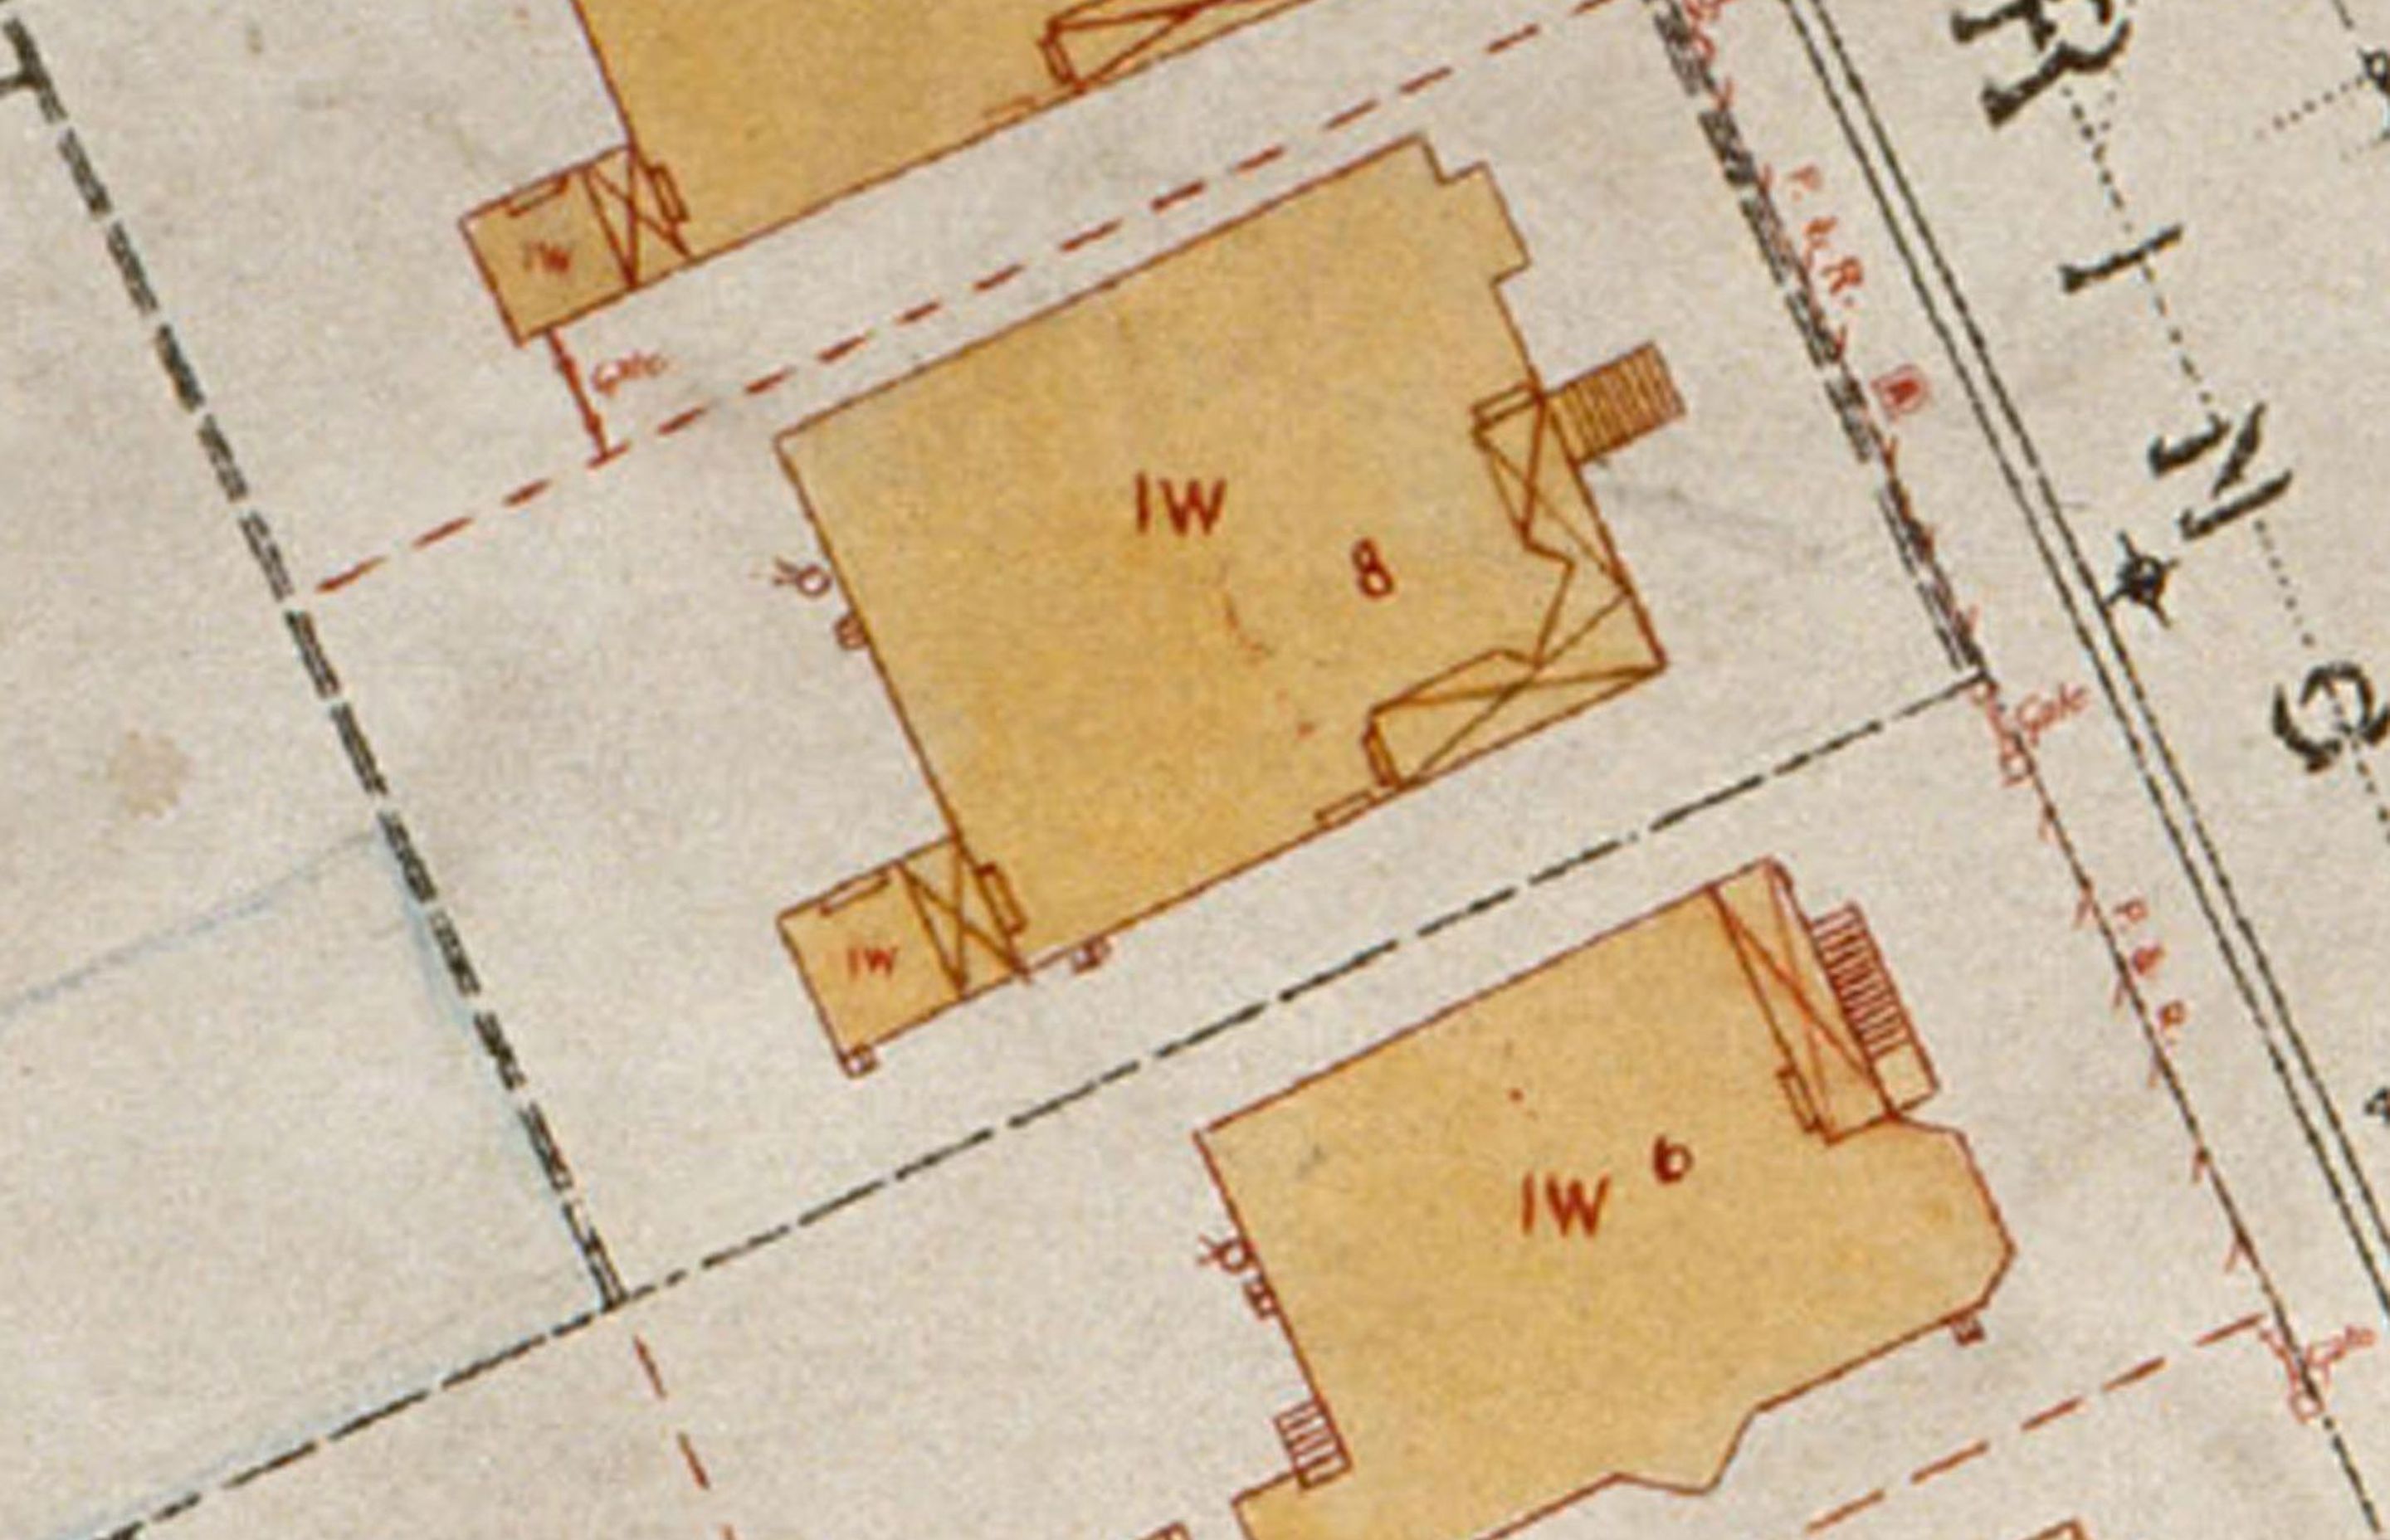 An image taken from the 1908 City of Auckland Plan, which dates the house somewhere between 1908 and 1919. 